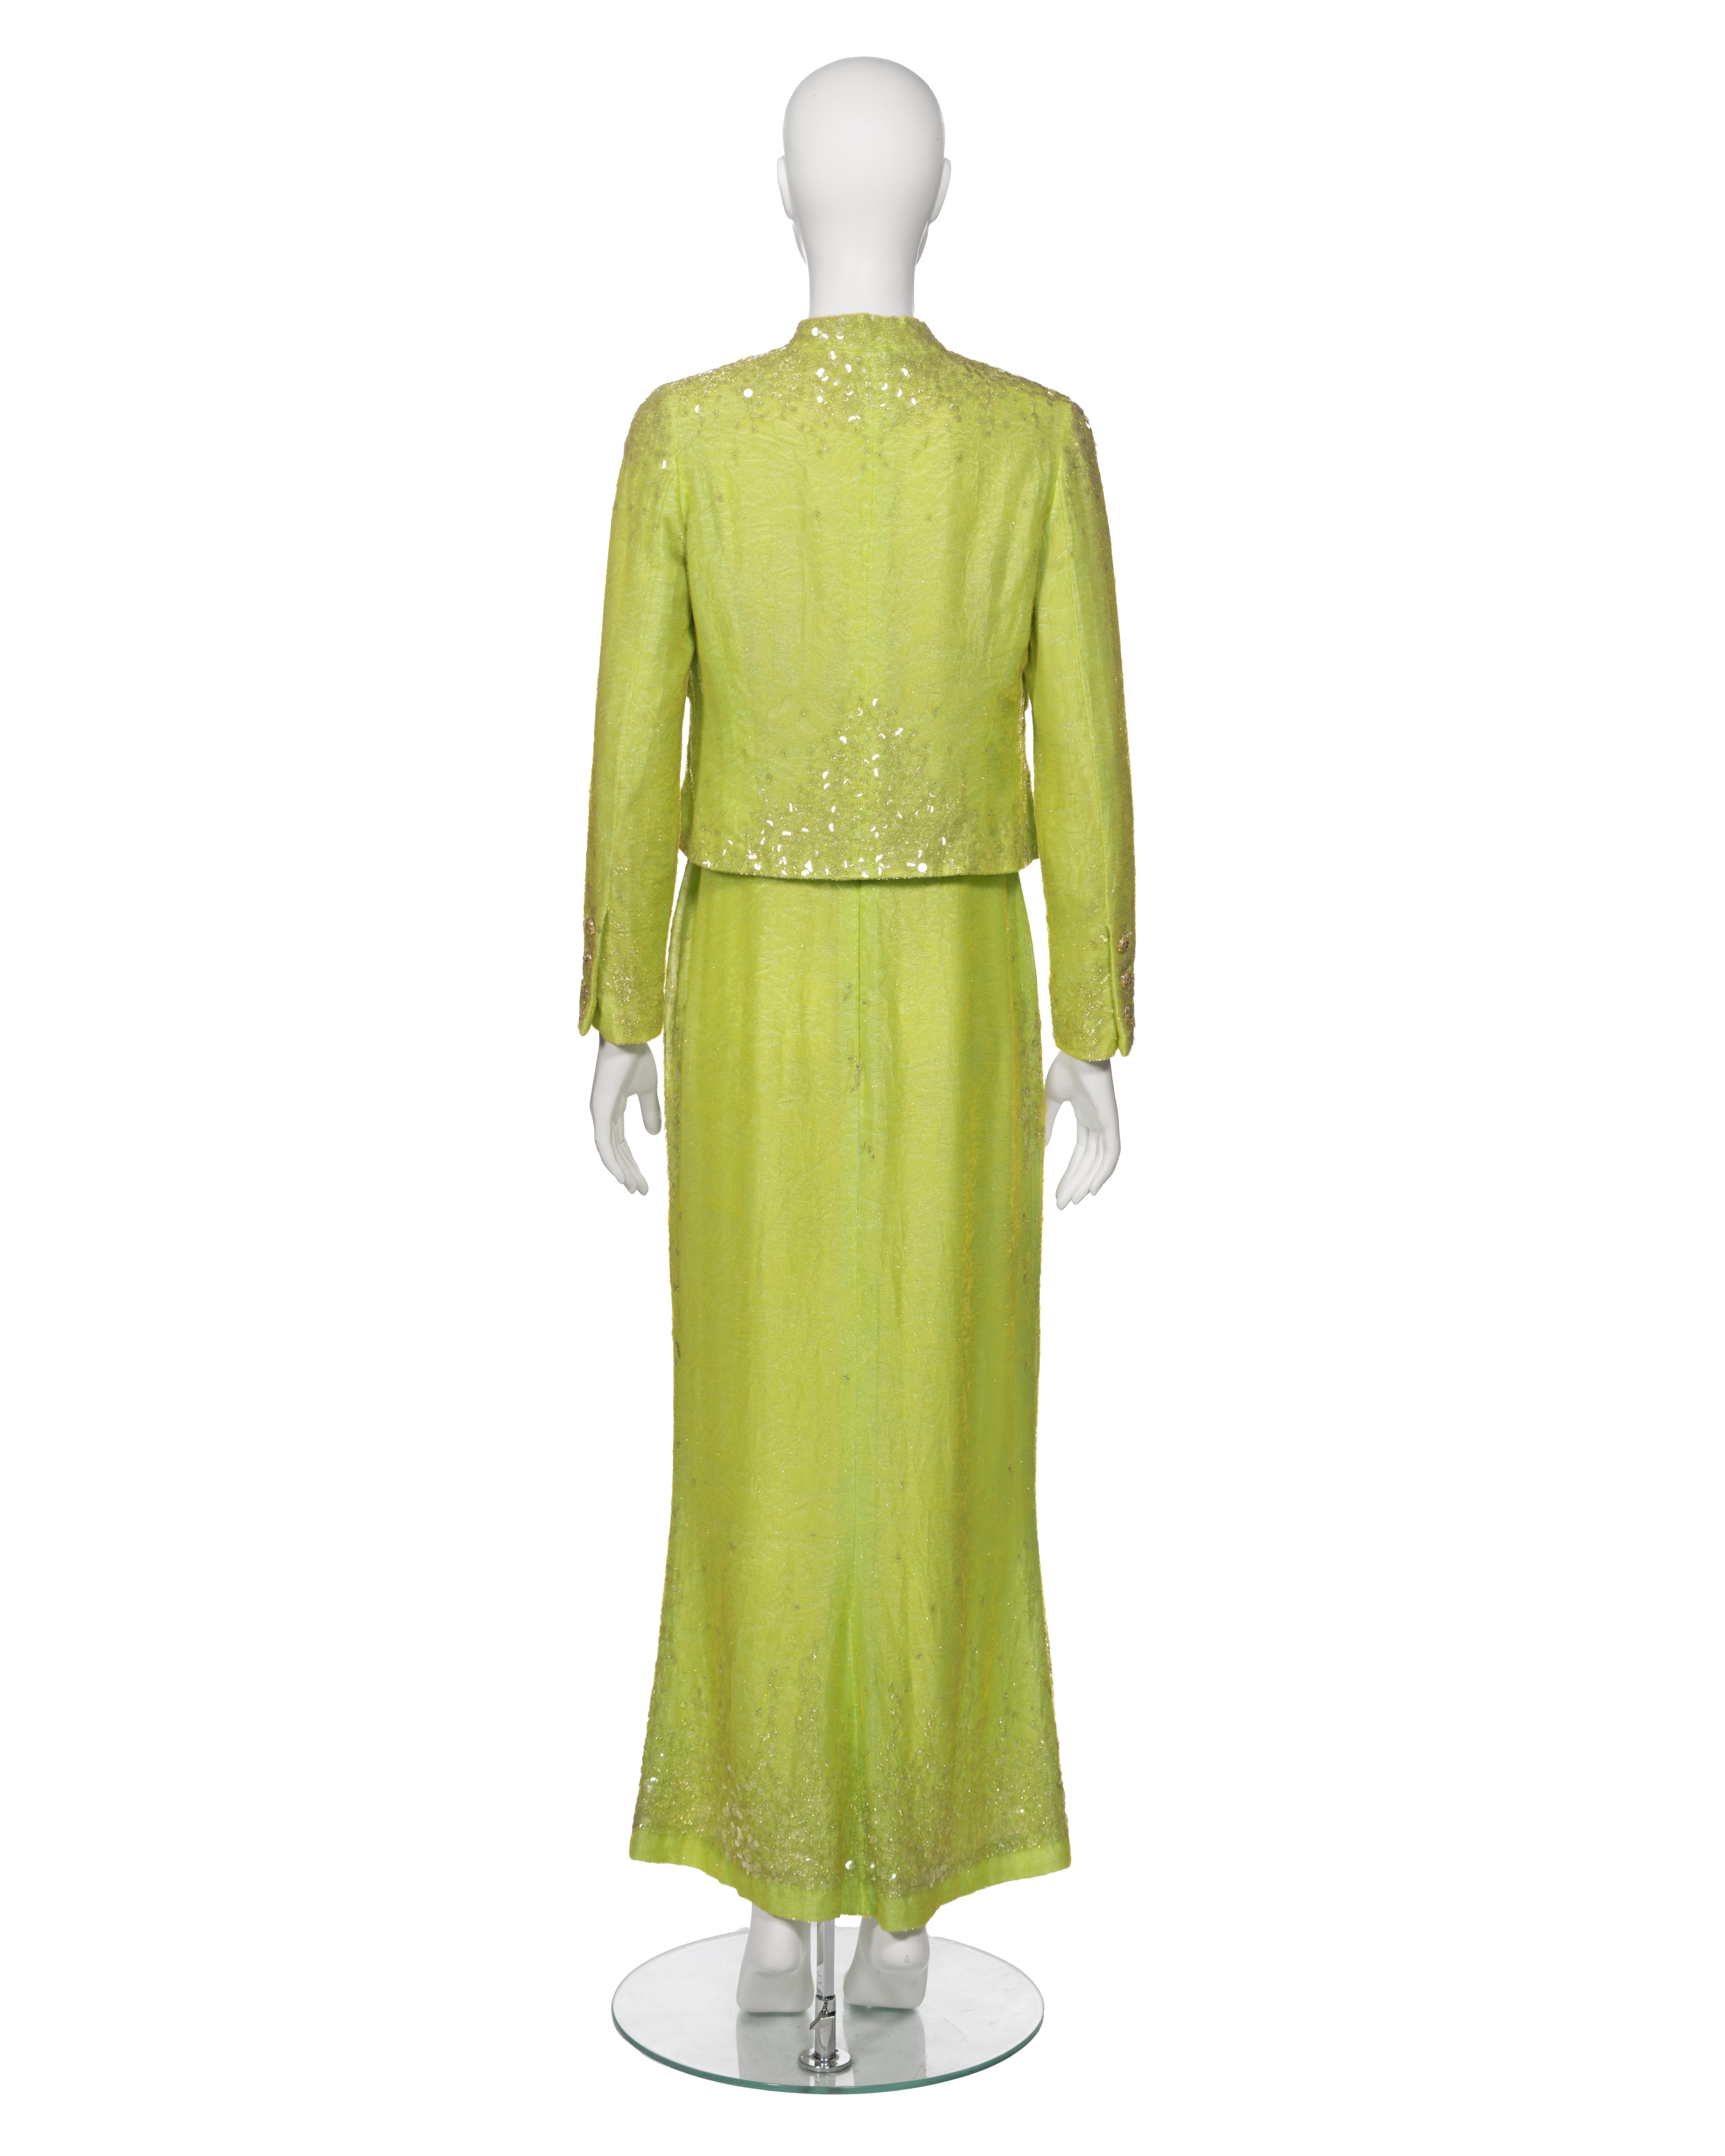 Chanel by Karl Lagerfeld Embellished Lime Green Velvet Dress and Jacket, ss 1997 For Sale 13